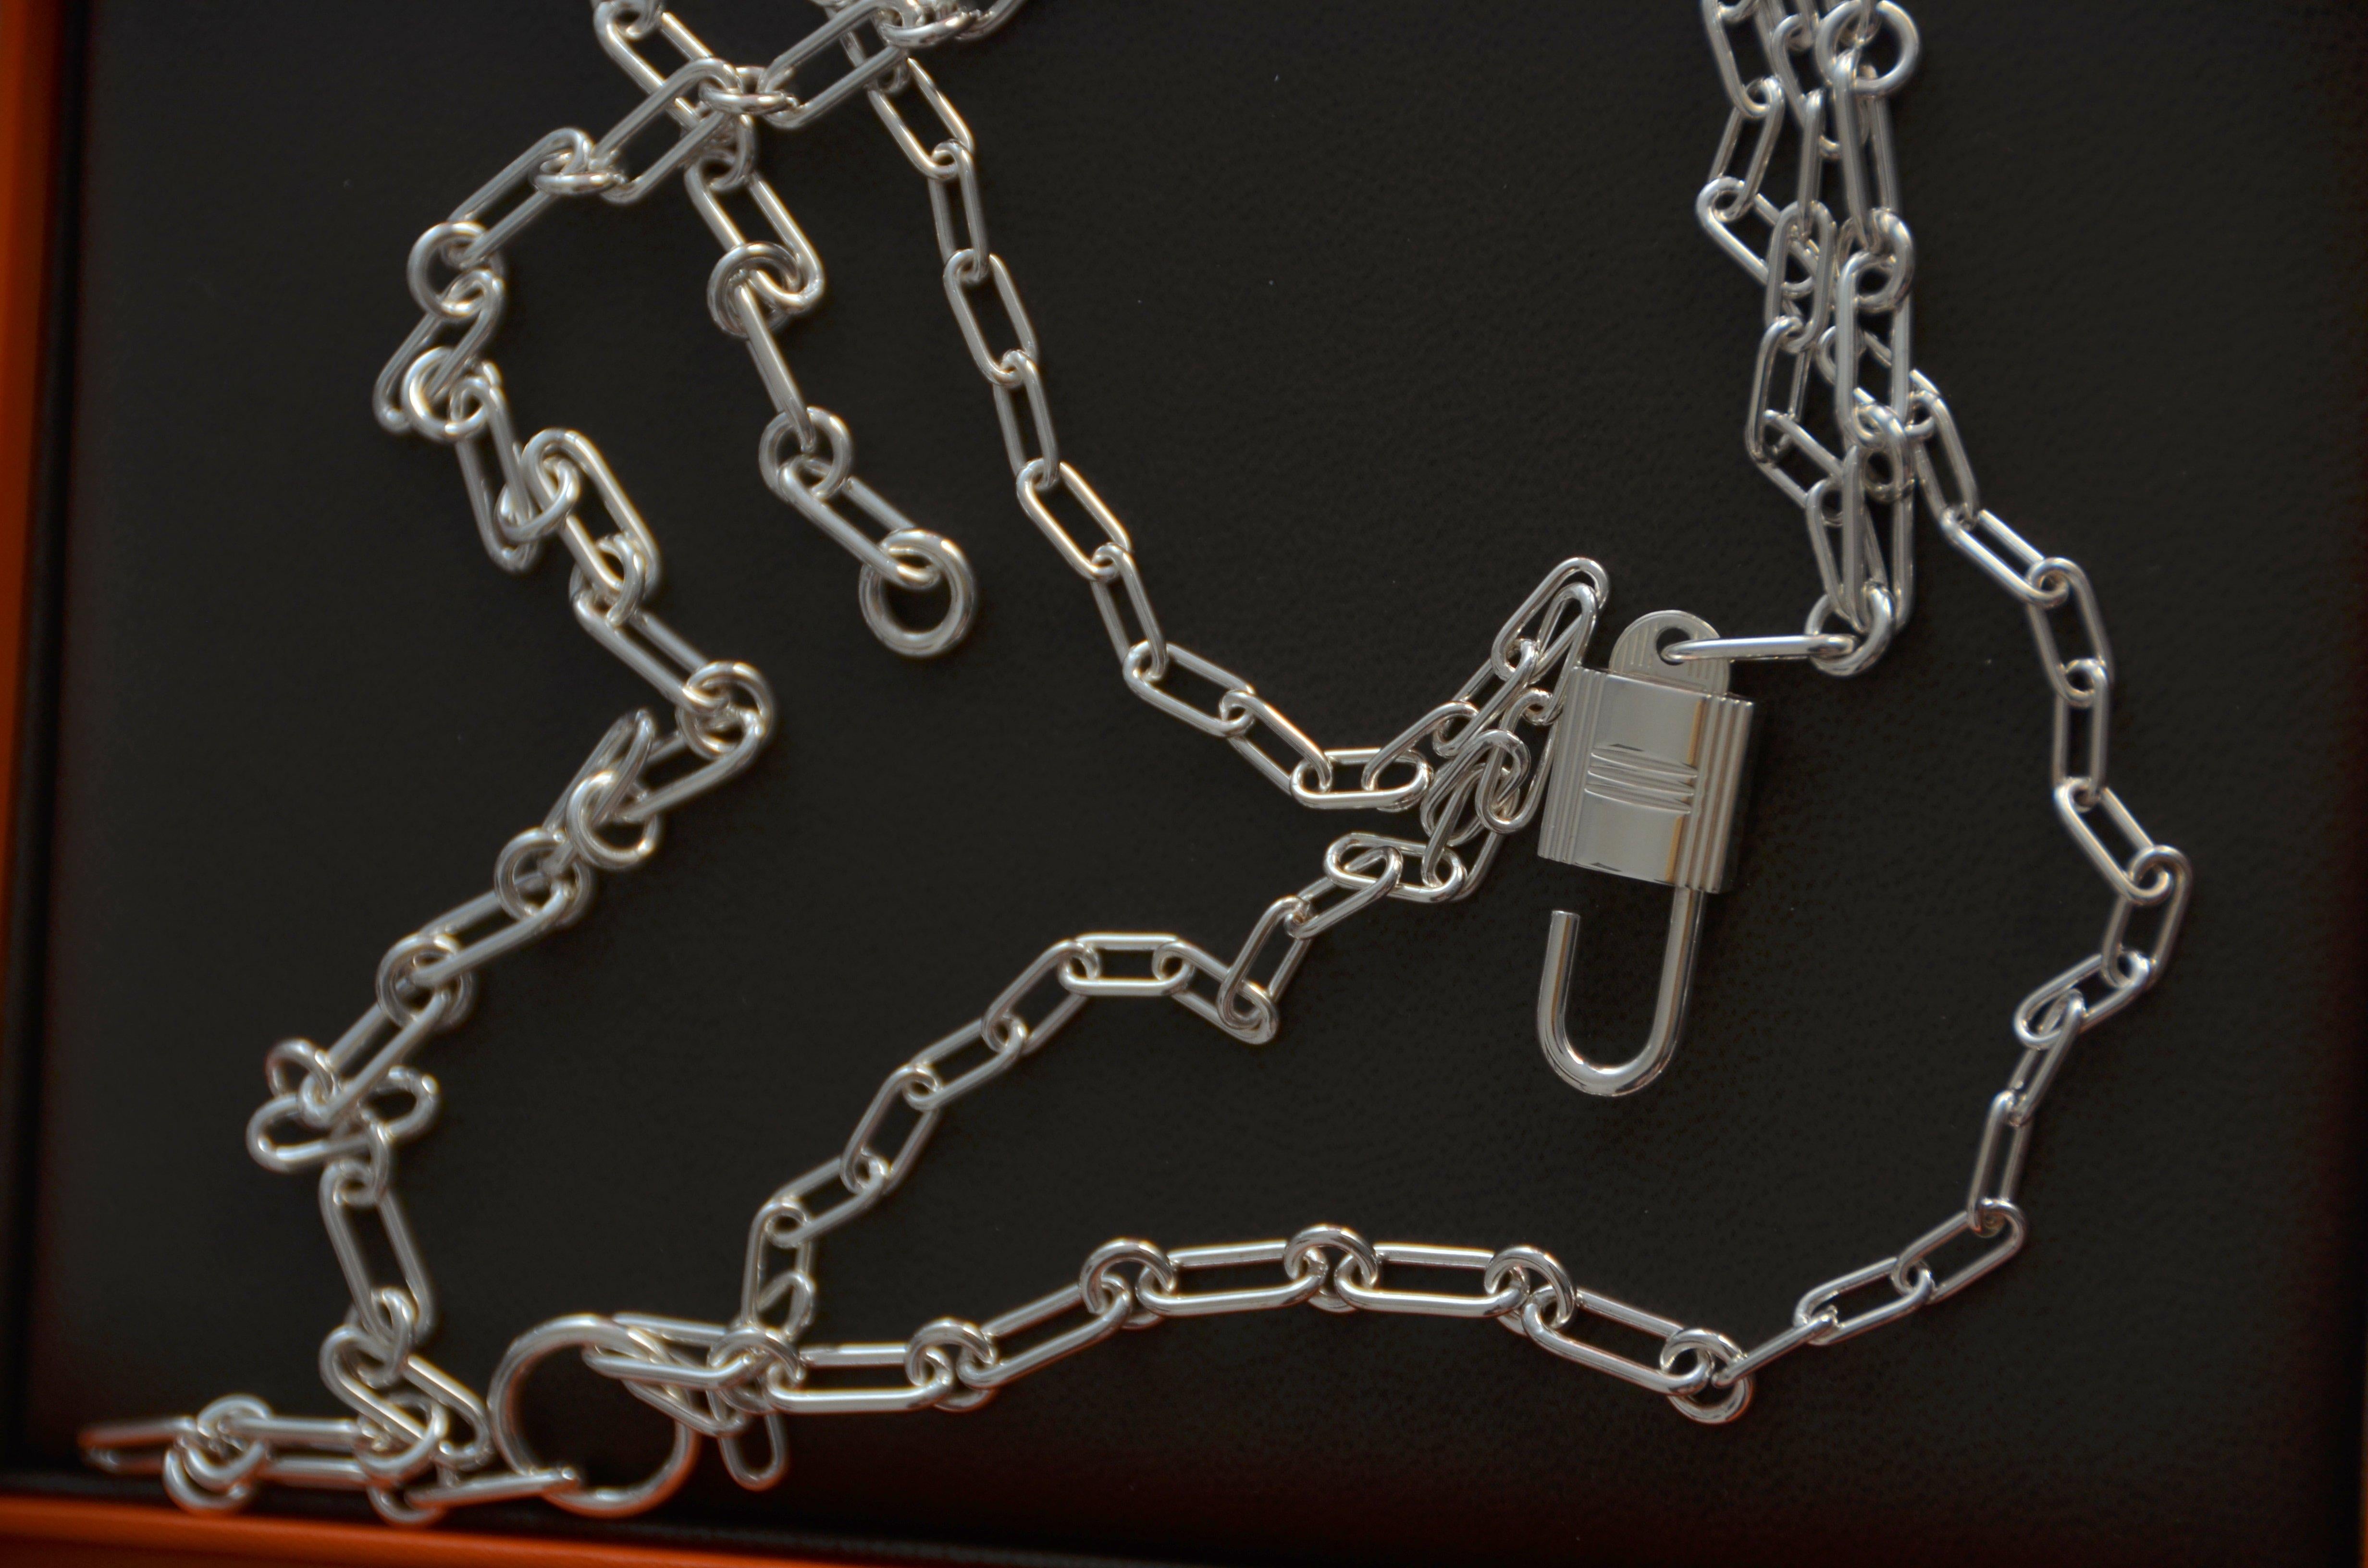 Hermes Alphakelly long necklace, medium model
Long necklace in sterling silver. The padlock, an iconic motif of the Kelly bag, is revealed in a silver version and features an interplay of different sized chains.
Made in Italy
Silver 925/1000
Chain